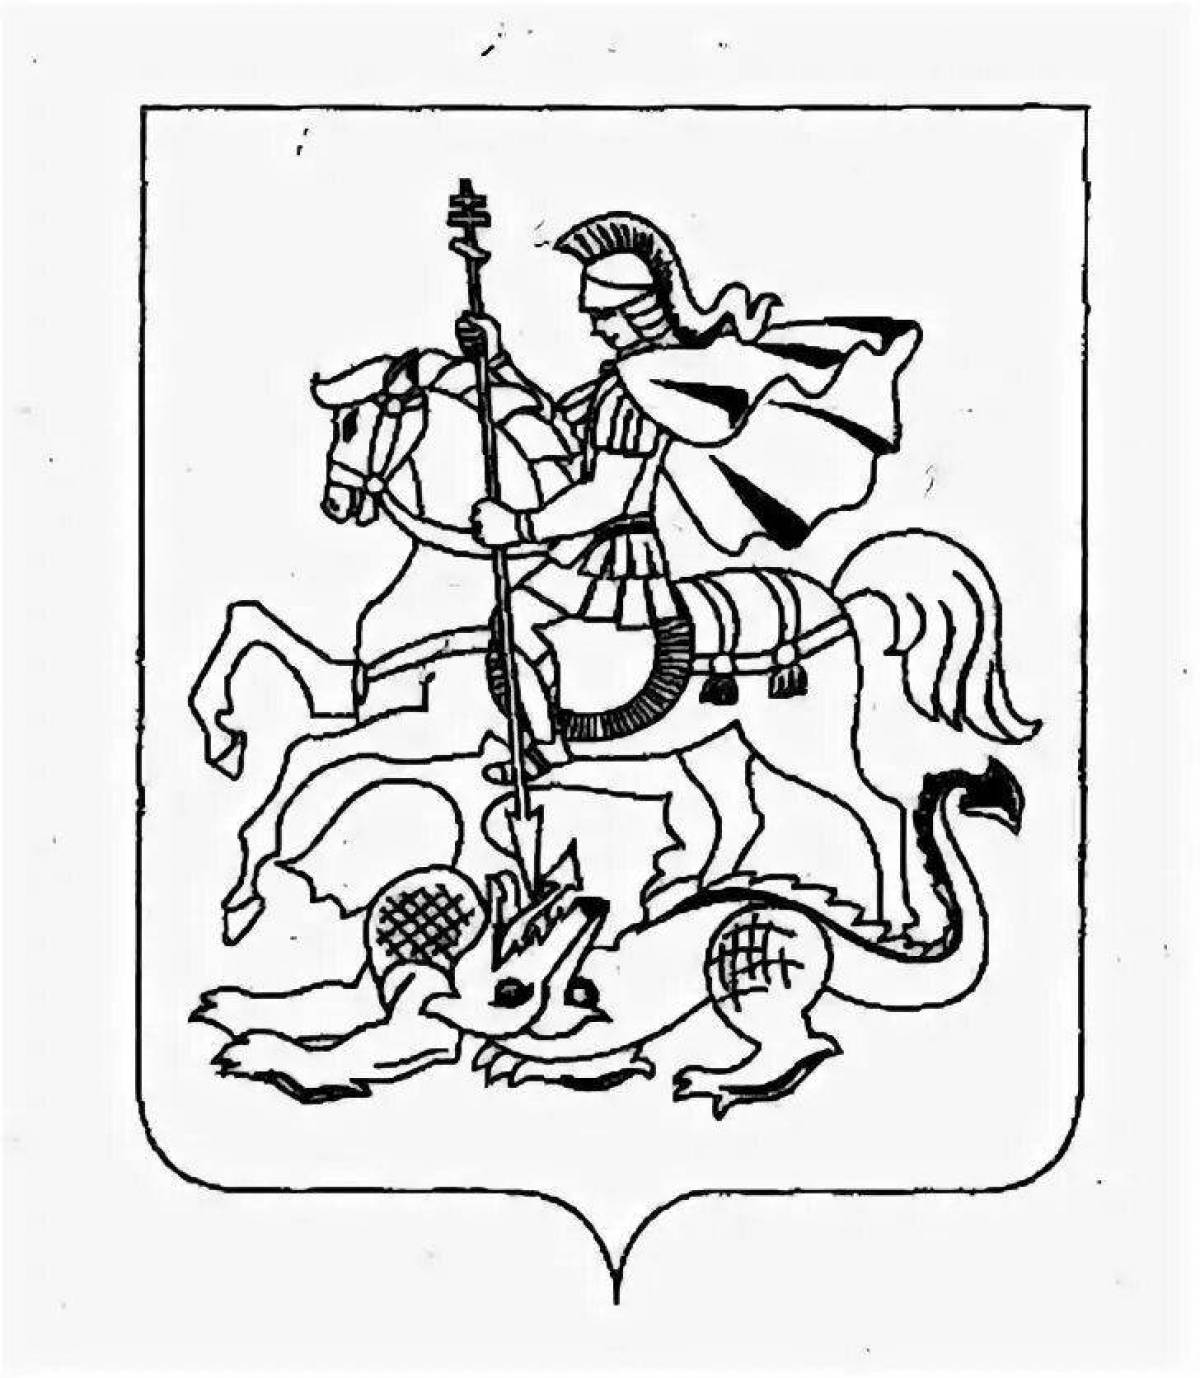 Moscow coat of arms #10